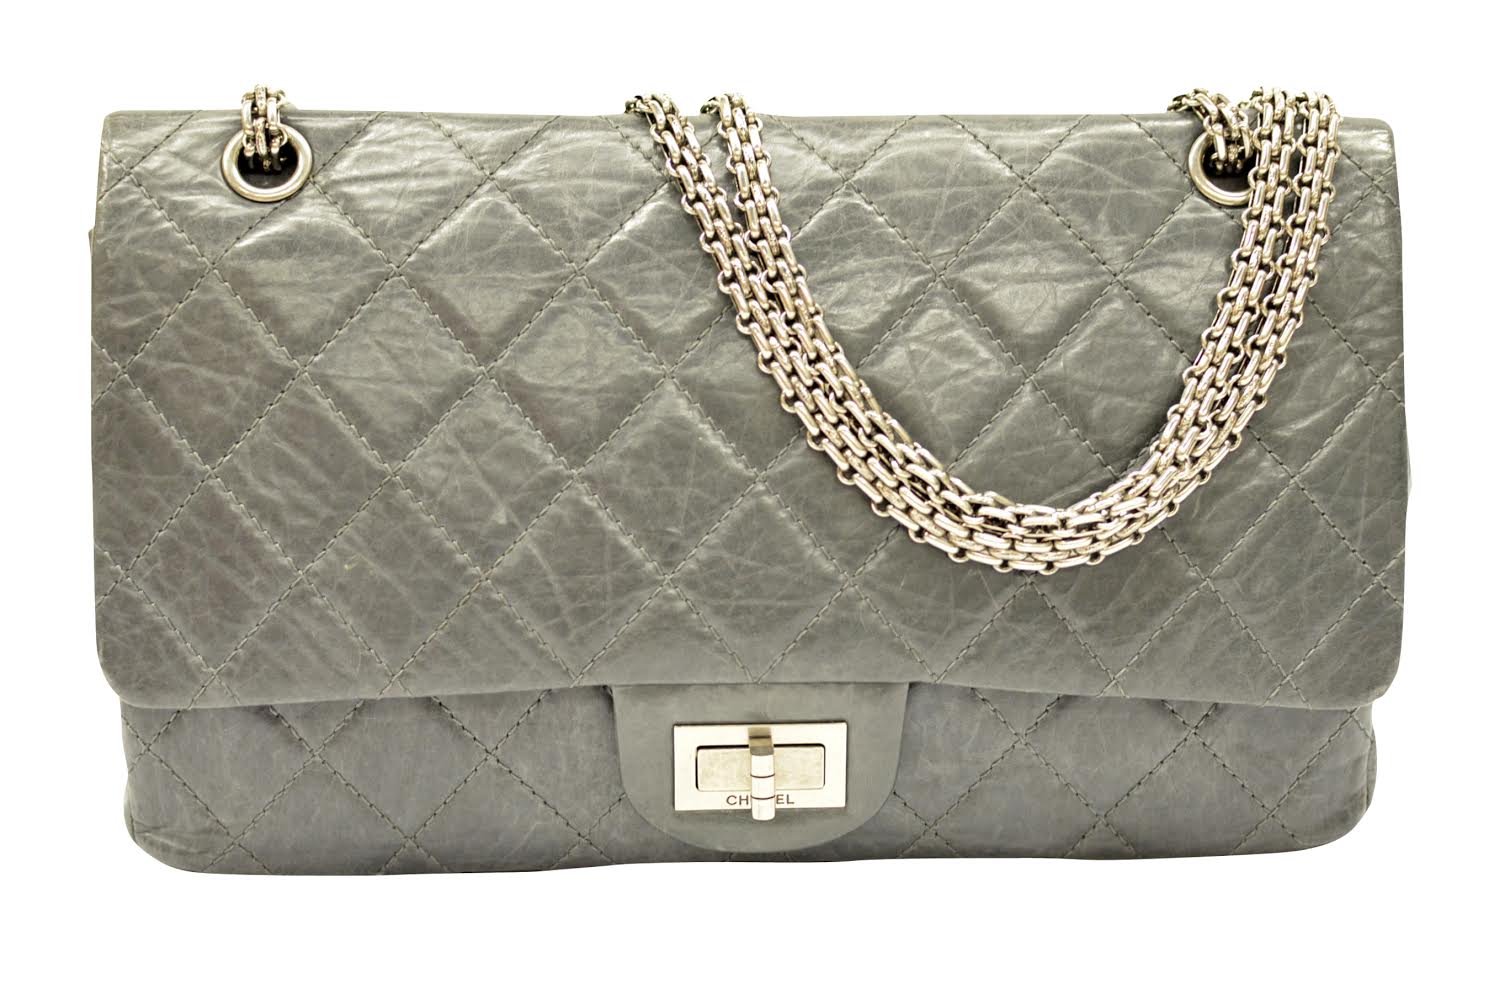 Influx of Pre-owned Chanel Handbags Hits Luxury Resale Site www.bagsaleusa.com